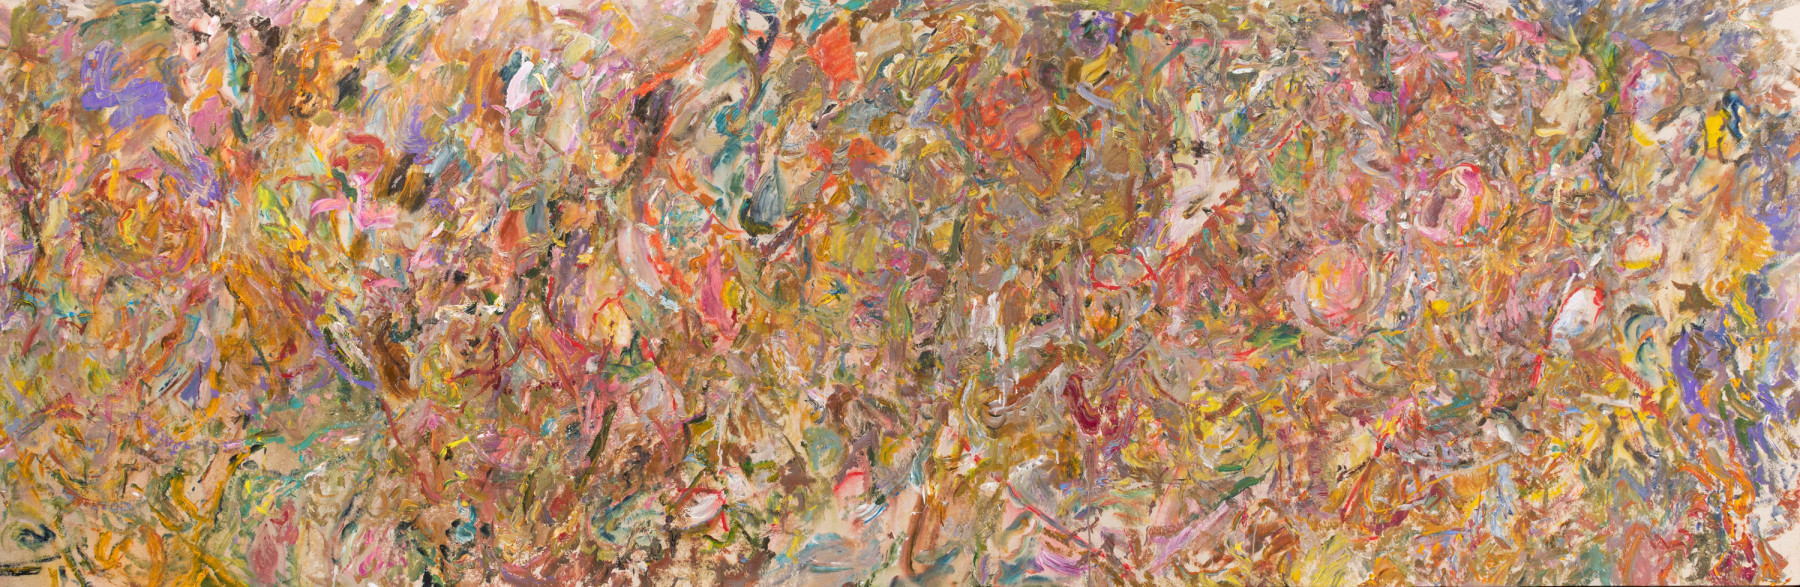 LARRY POONS (American b. 1937)

Dining with Blakelock

2021

Acrylic on canvas

55 3/4 x 171 3/4 inches

141.6 x 436.2cm